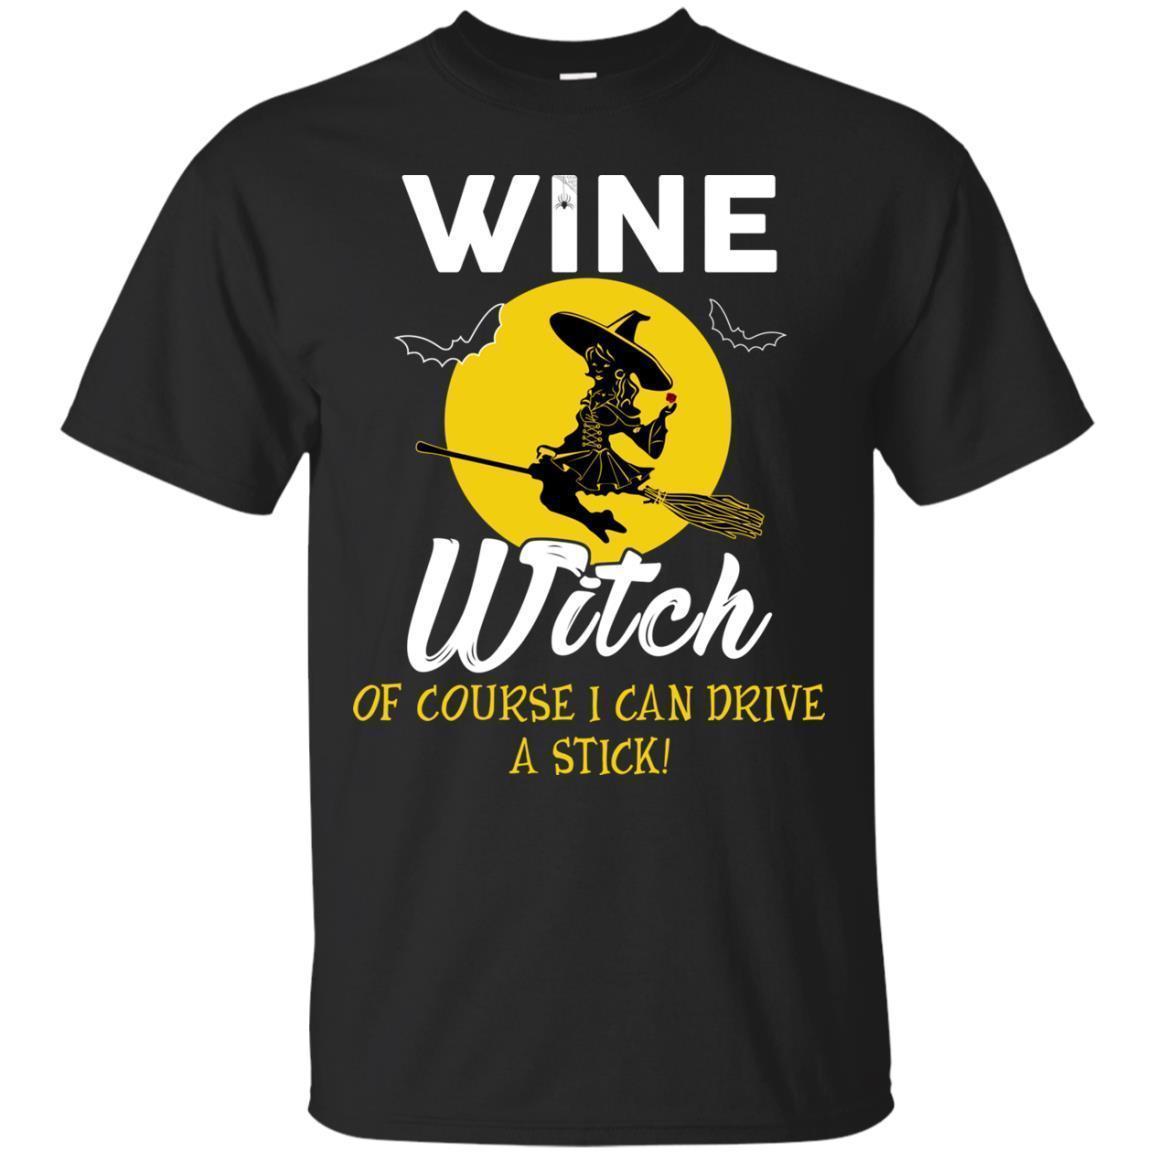 Get Here Shirt Wine Witch Of Course I Can Drive A Stick Shirt Shirts